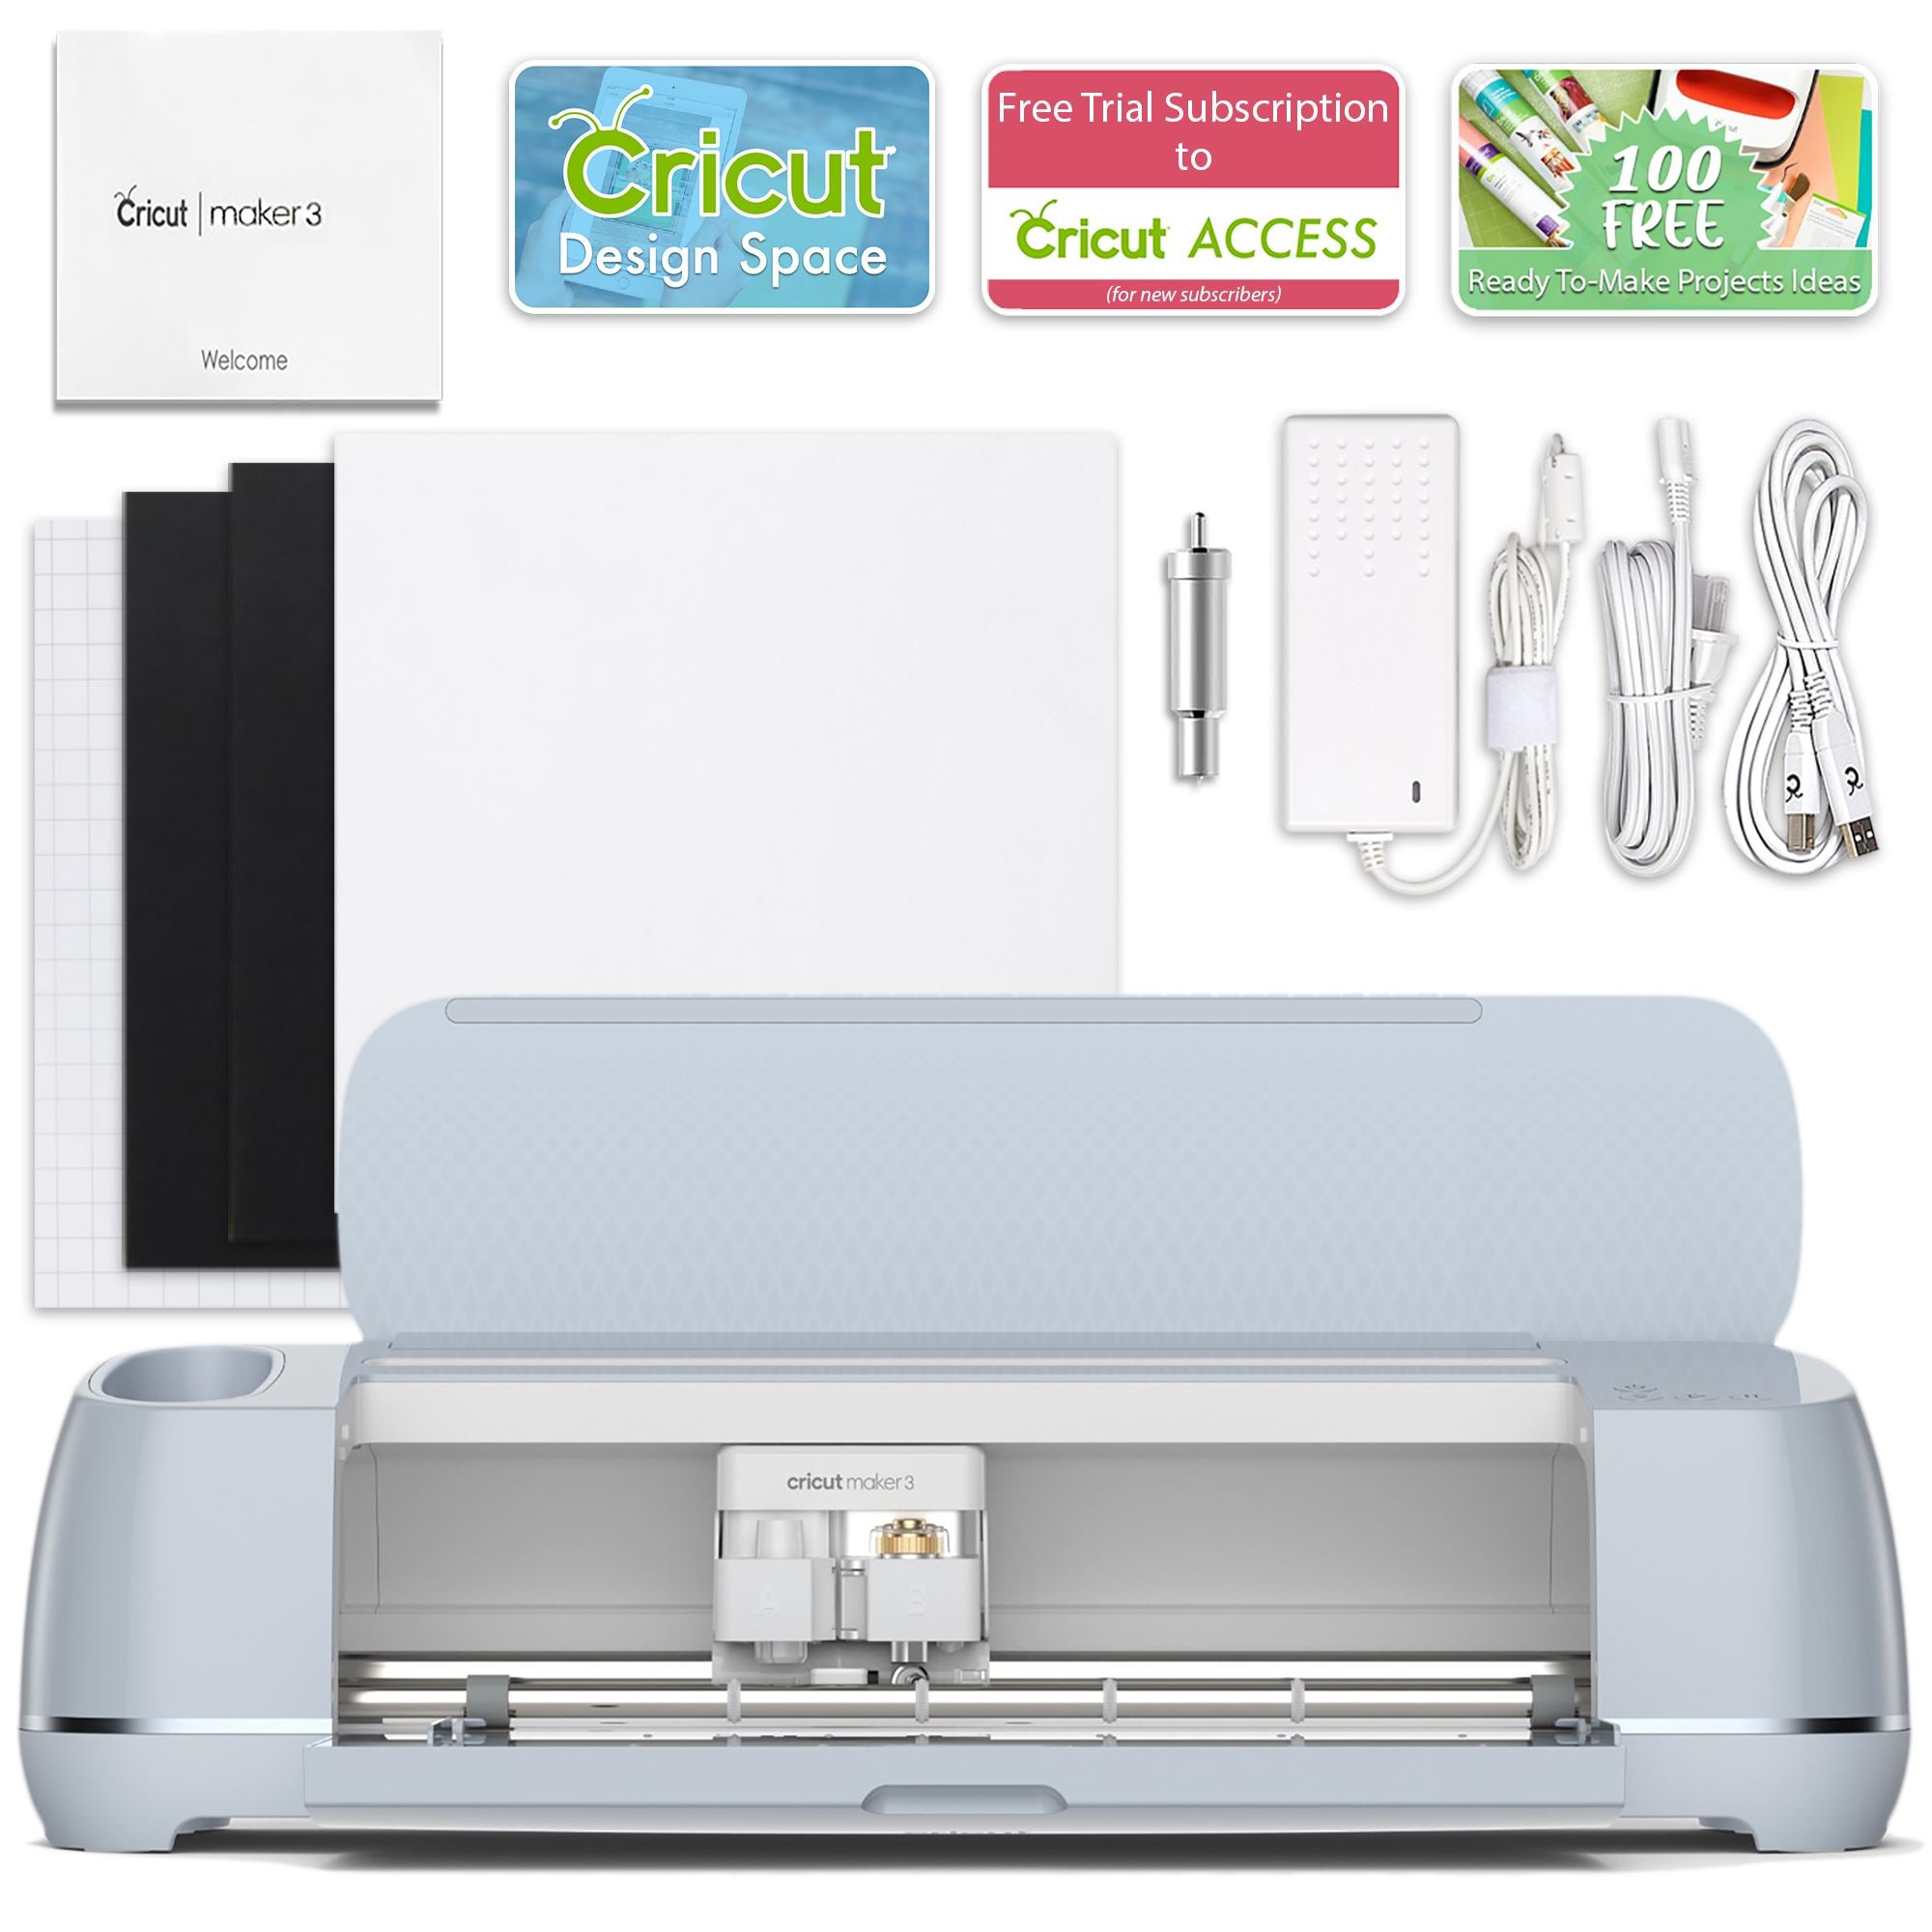  Cricut Maker 3 Machine Smart Vinyl & Iron On Bundle DIY Matless  Cutting 10X Force, 2X Faster, Cuts 300+ Materials, Compatible with iOS,  Android, Windows & Mac, Bluetooth Connectivity, Beginner Pro